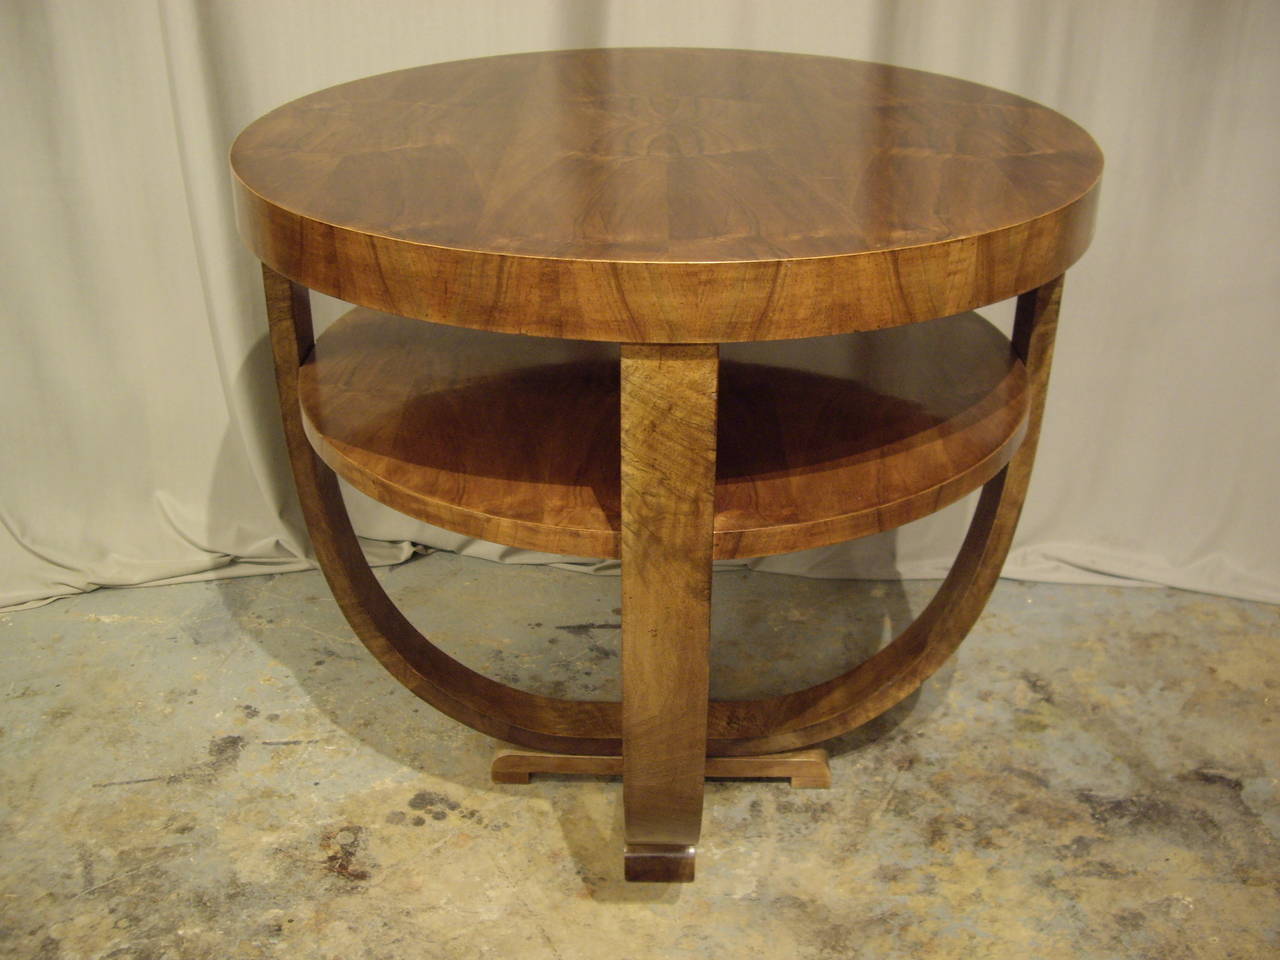 Very elegant Art Deco walnut table. Very nice patina with high shelf. Suitable for entrance hall table or side table.